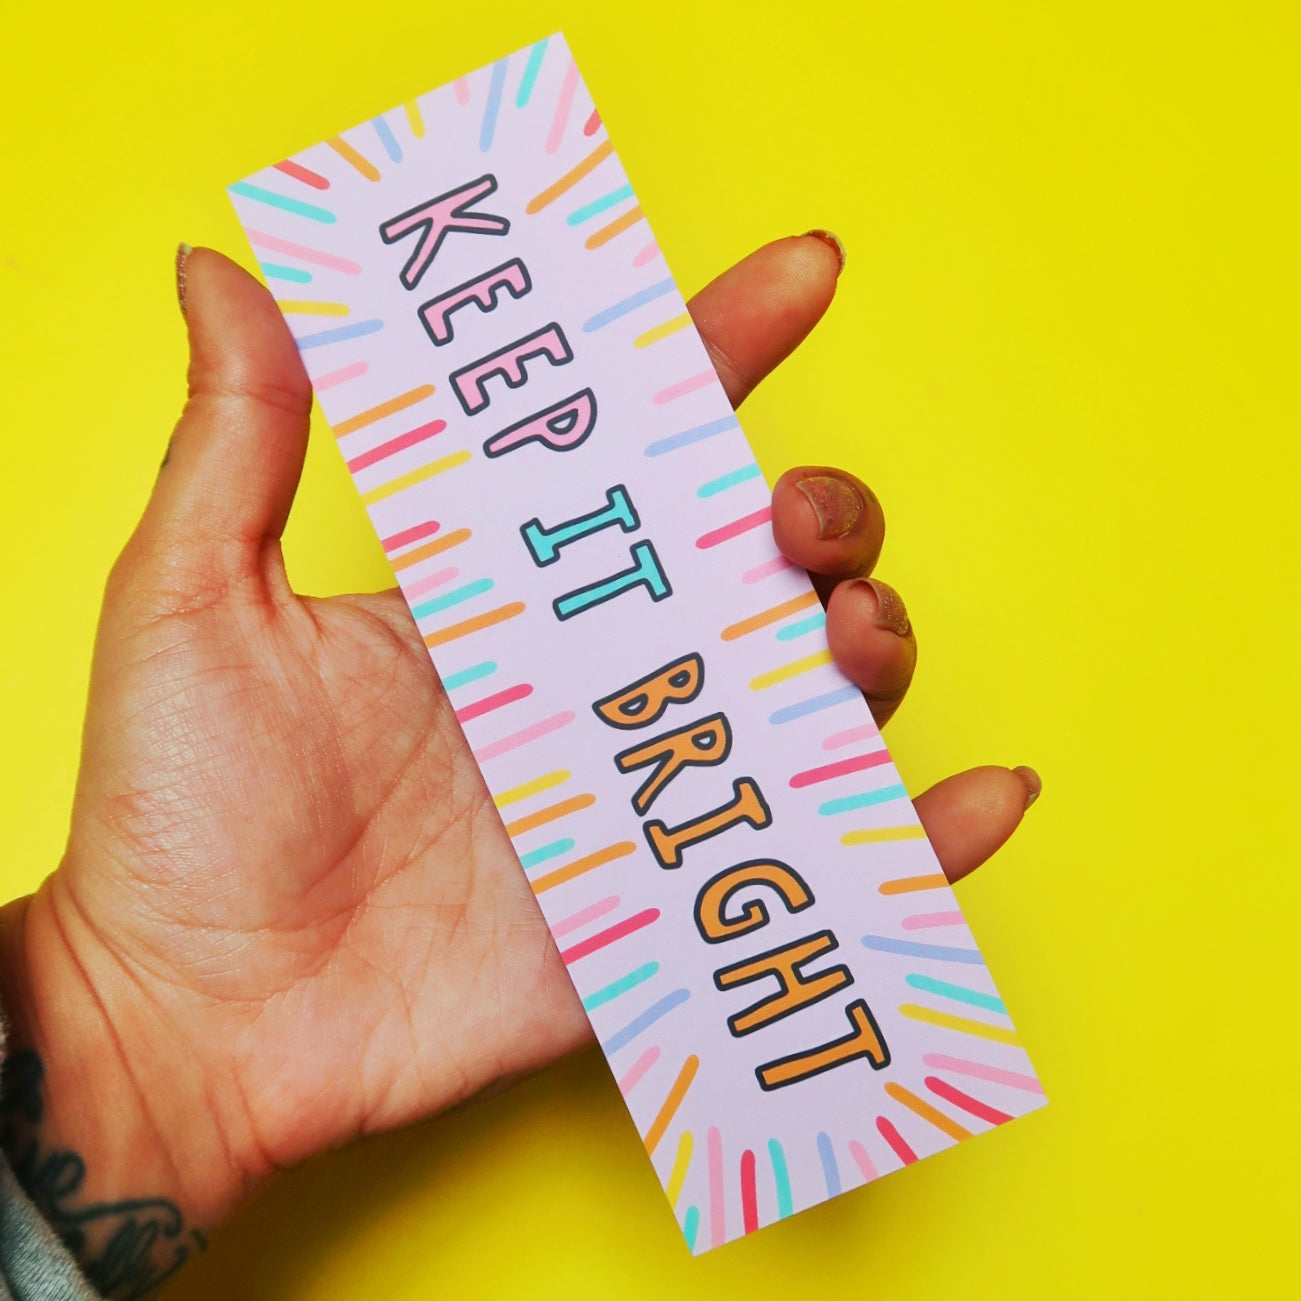 Being Kind Is Cool kids book - a book about kindness - bookmark